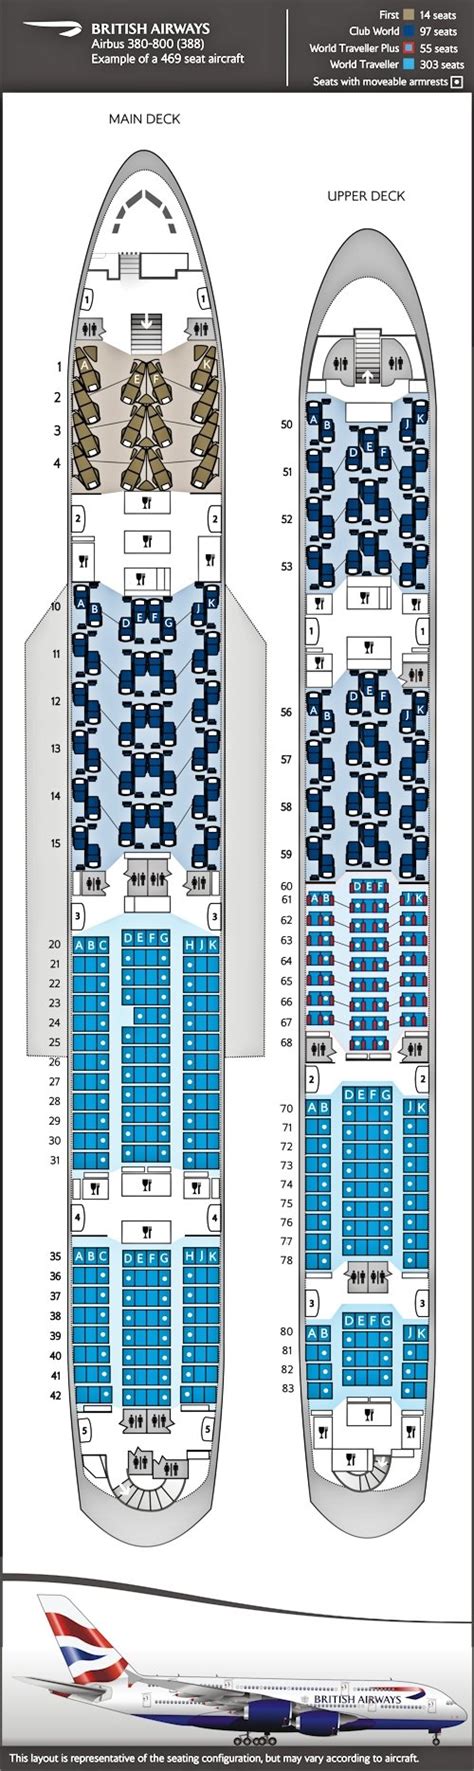 British Airways Boeing 787 aircraft seat map. British Airways Boeing 787 Dreamliner fleet features a practical cabin seat map layout, offering First, Club World, and World Traveller classes. The First class area is designed for privacy and comfort, Club World seats convert to flat beds and provide aisle access, and World Traveller offers .... 